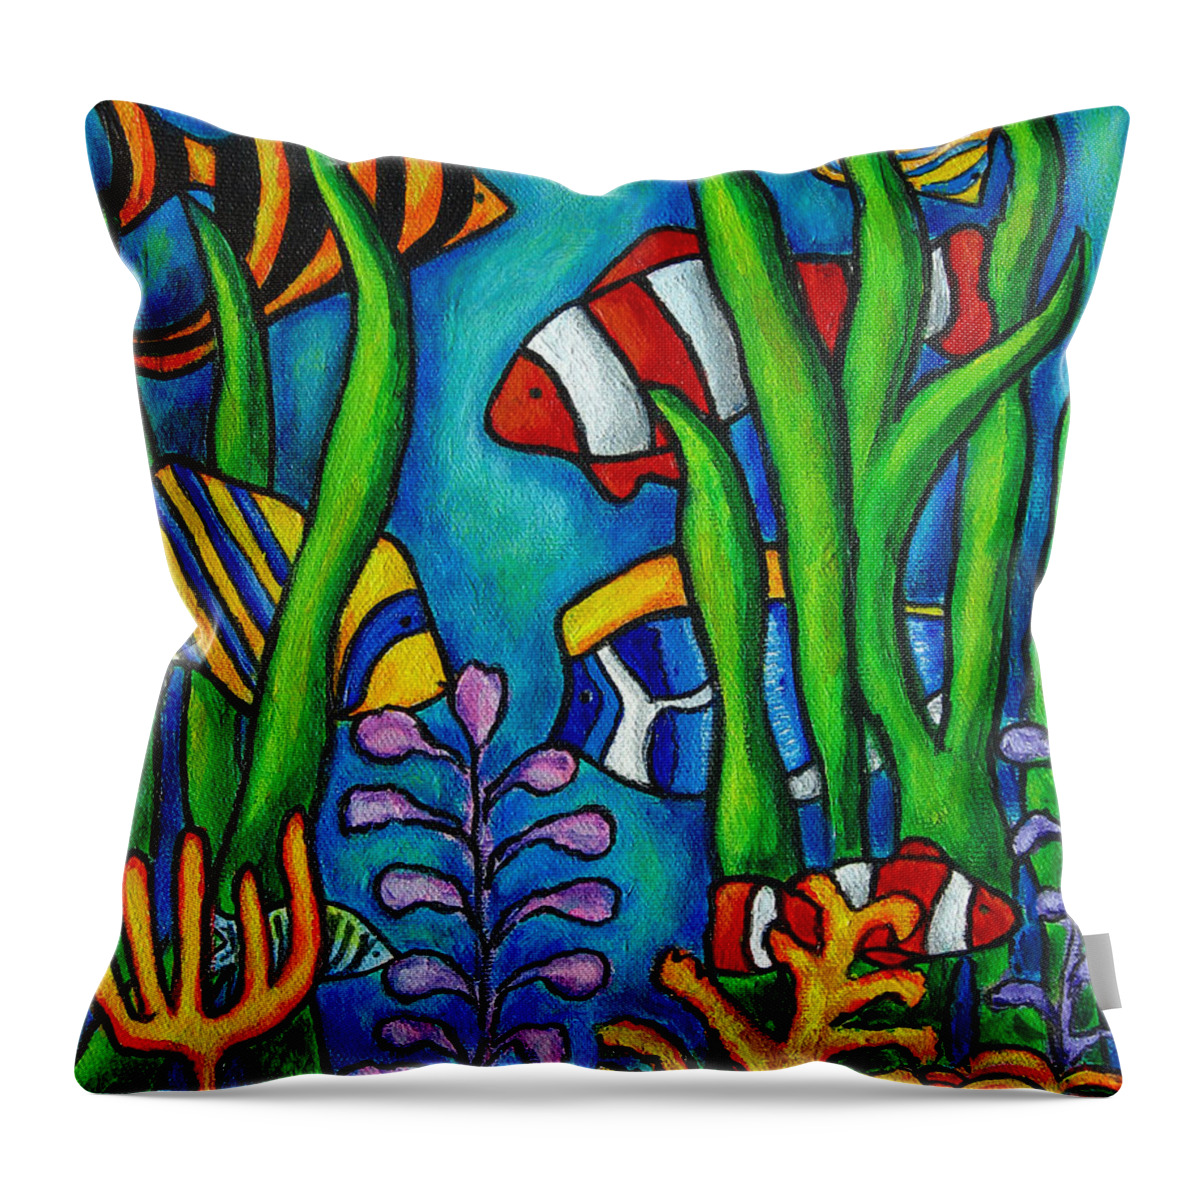 Tropical Throw Pillow featuring the painting Tropical Gems by Lisa Lorenz